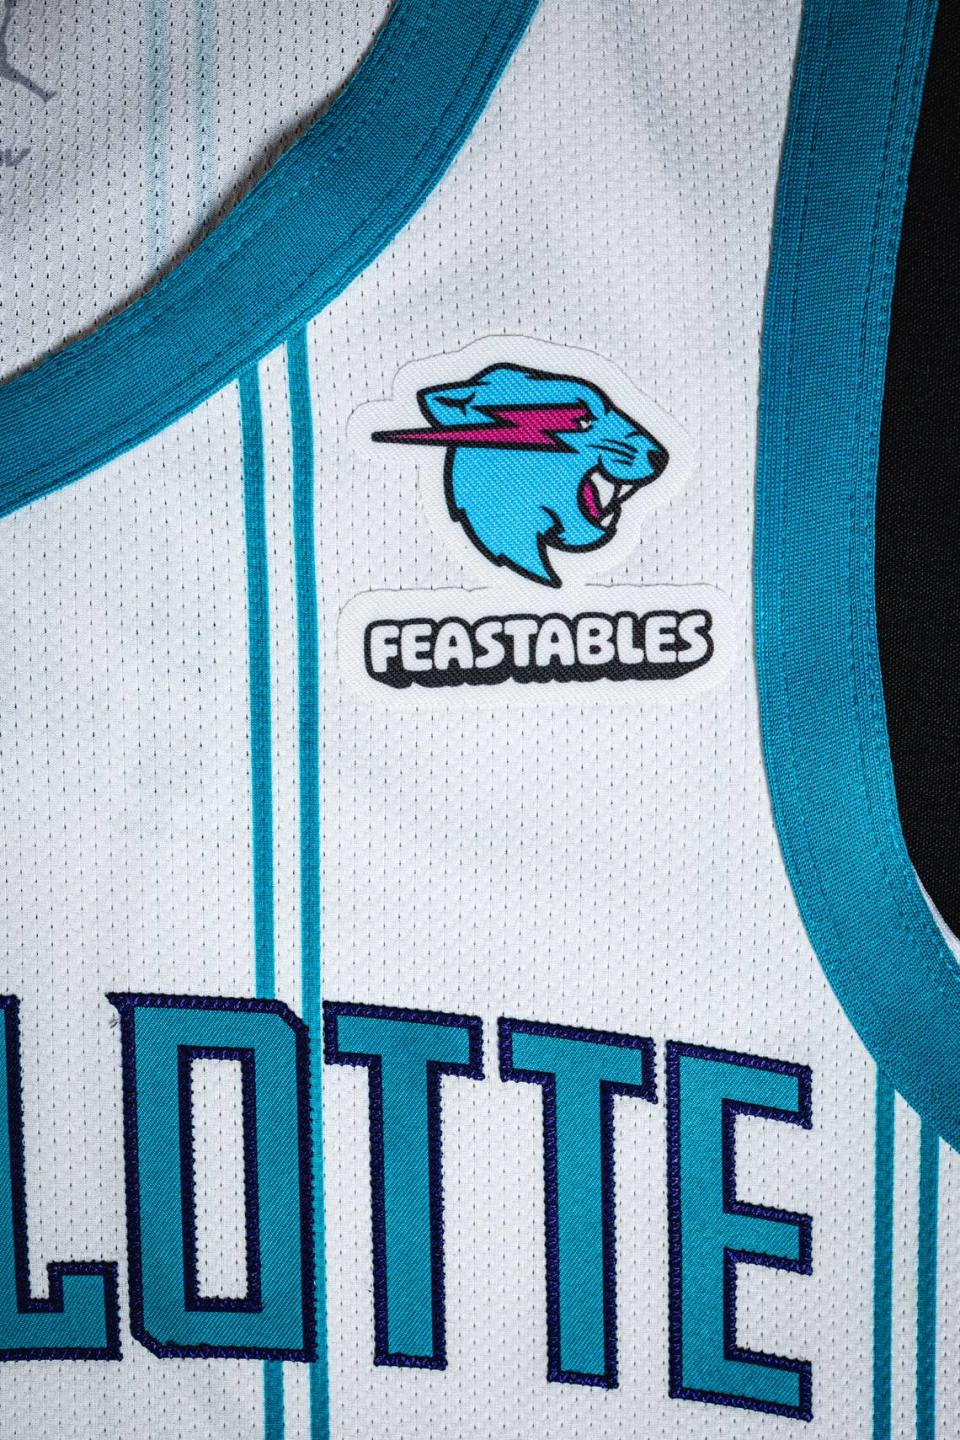 Feastables, a snack brand founded by well-known YouTube star Jimmy “MrBeast” Donaldson , is going to be the Hornets’ official jersey patch, the team announced Monday.